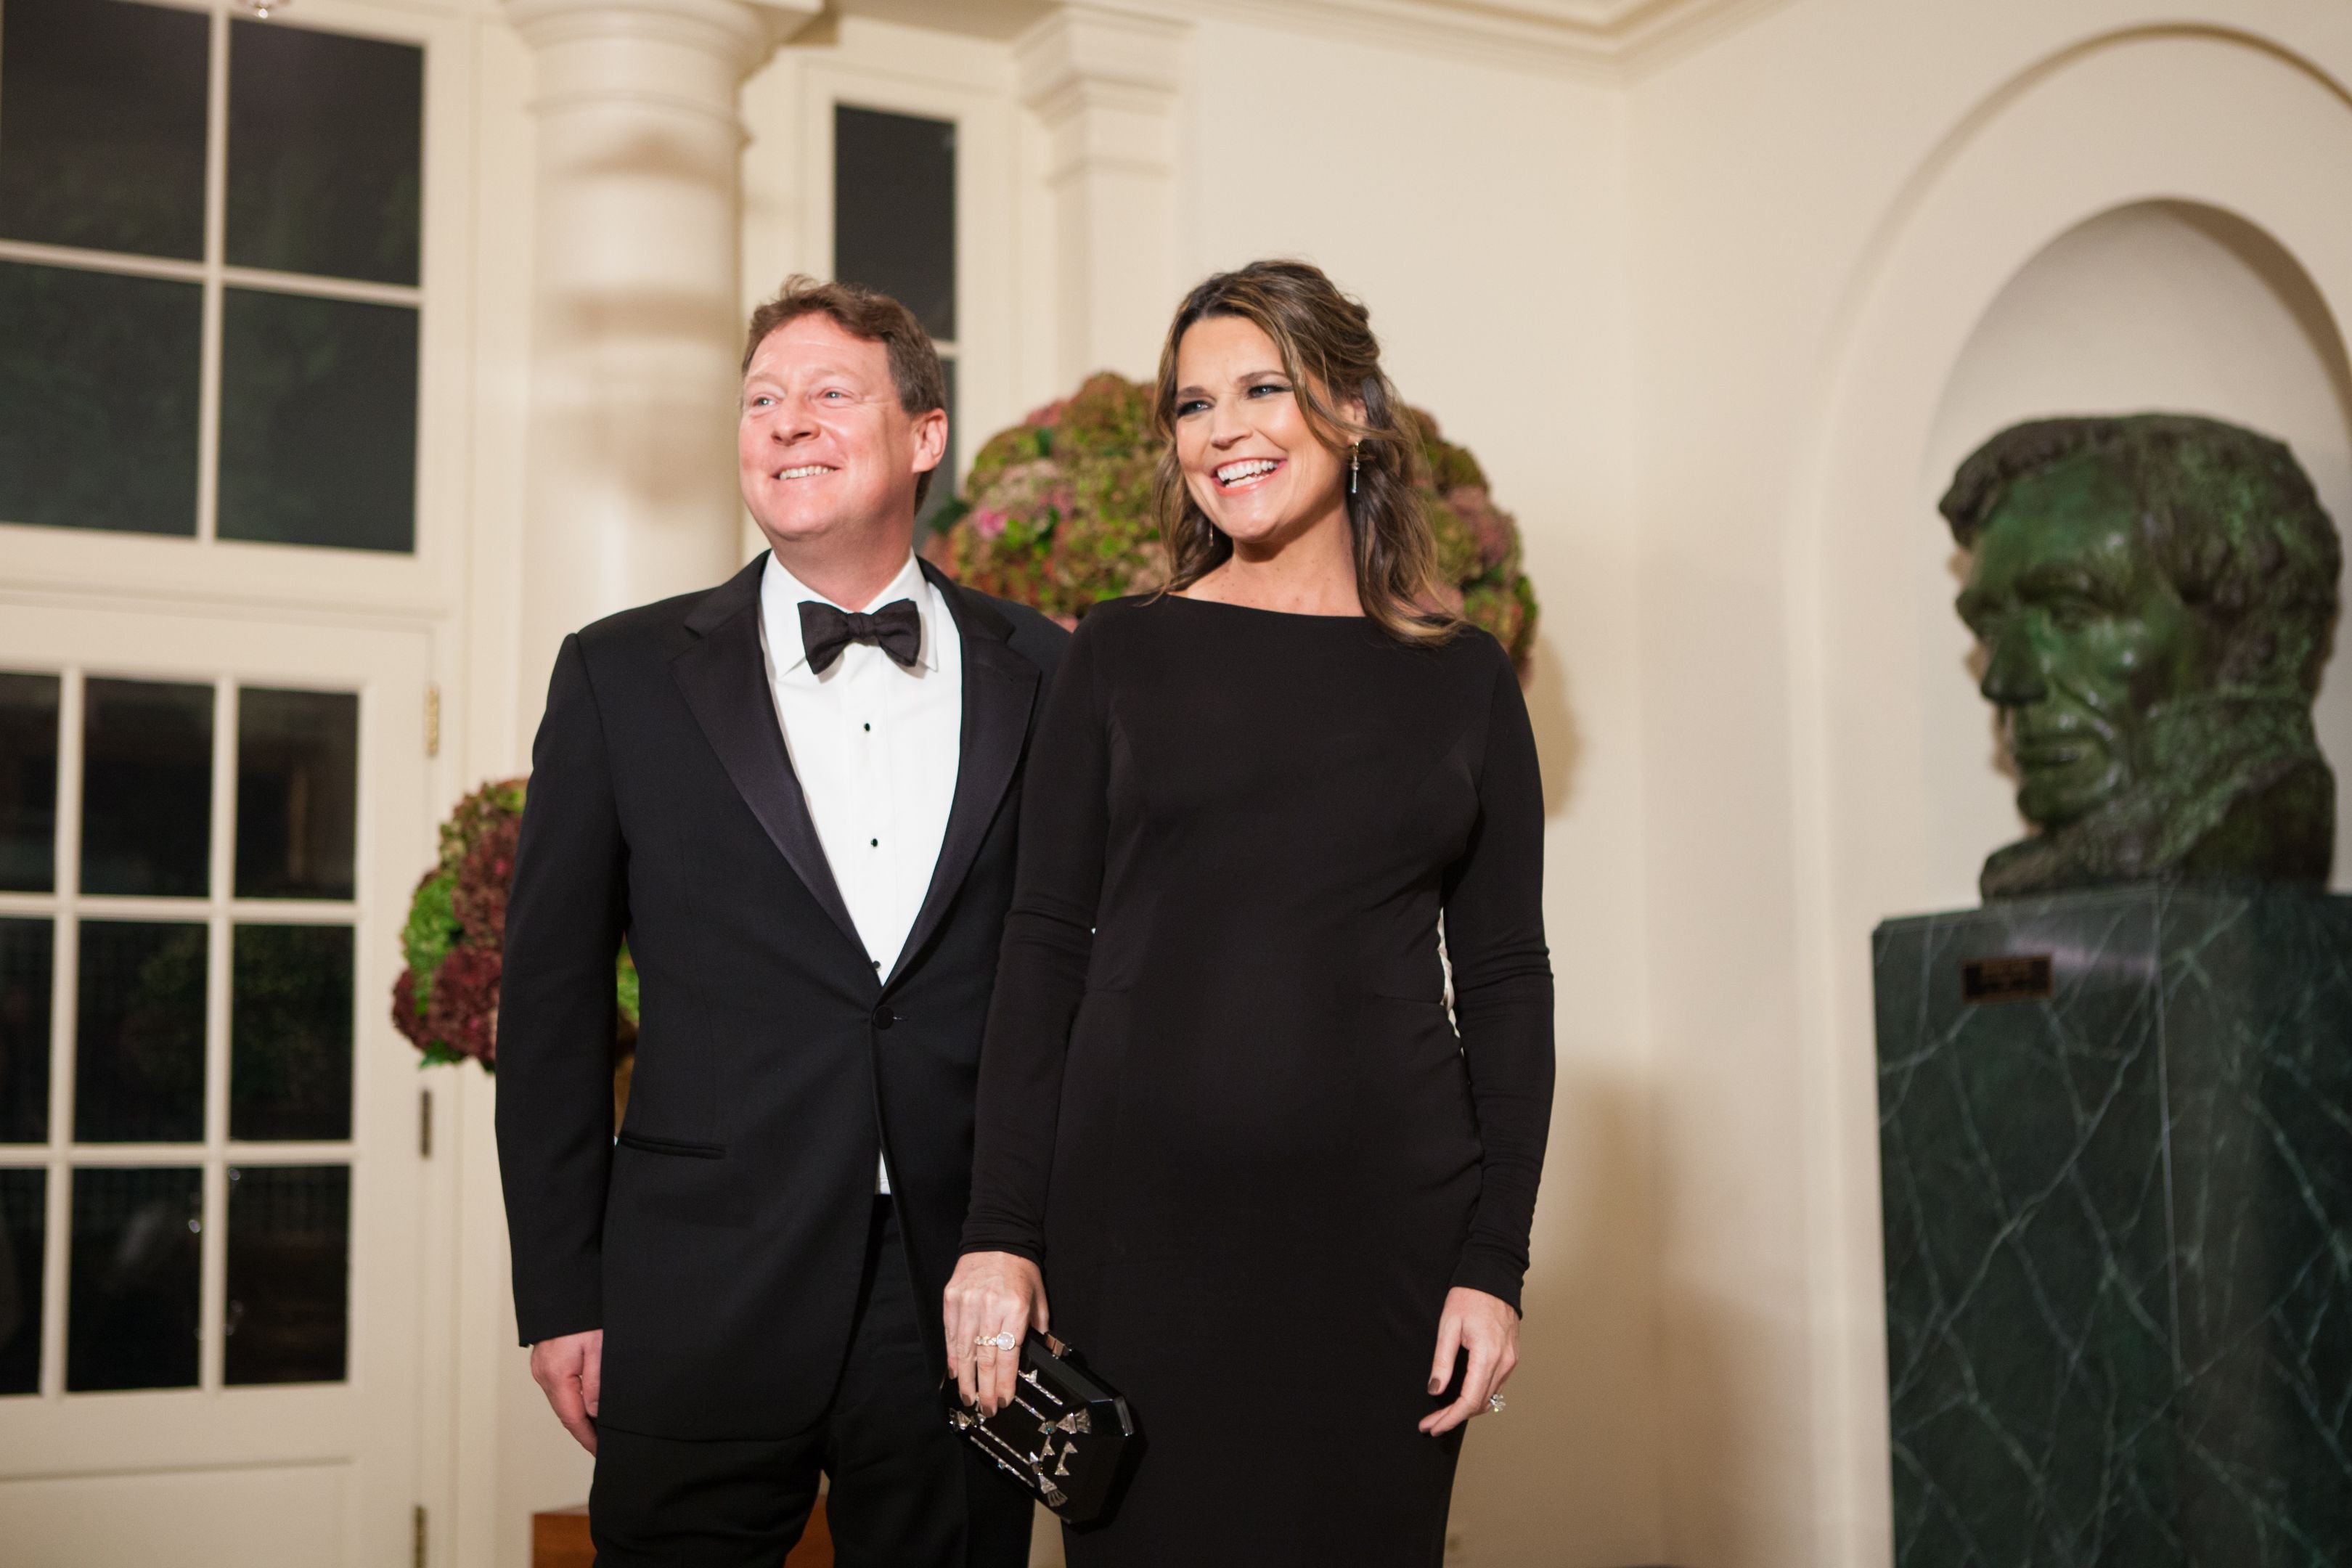 Michael Feldman and Savannah Guthrie at the White House in Washington, DC, on 18 October 2016 | Photo: Cheriss May/NurPhoto/Getty Images